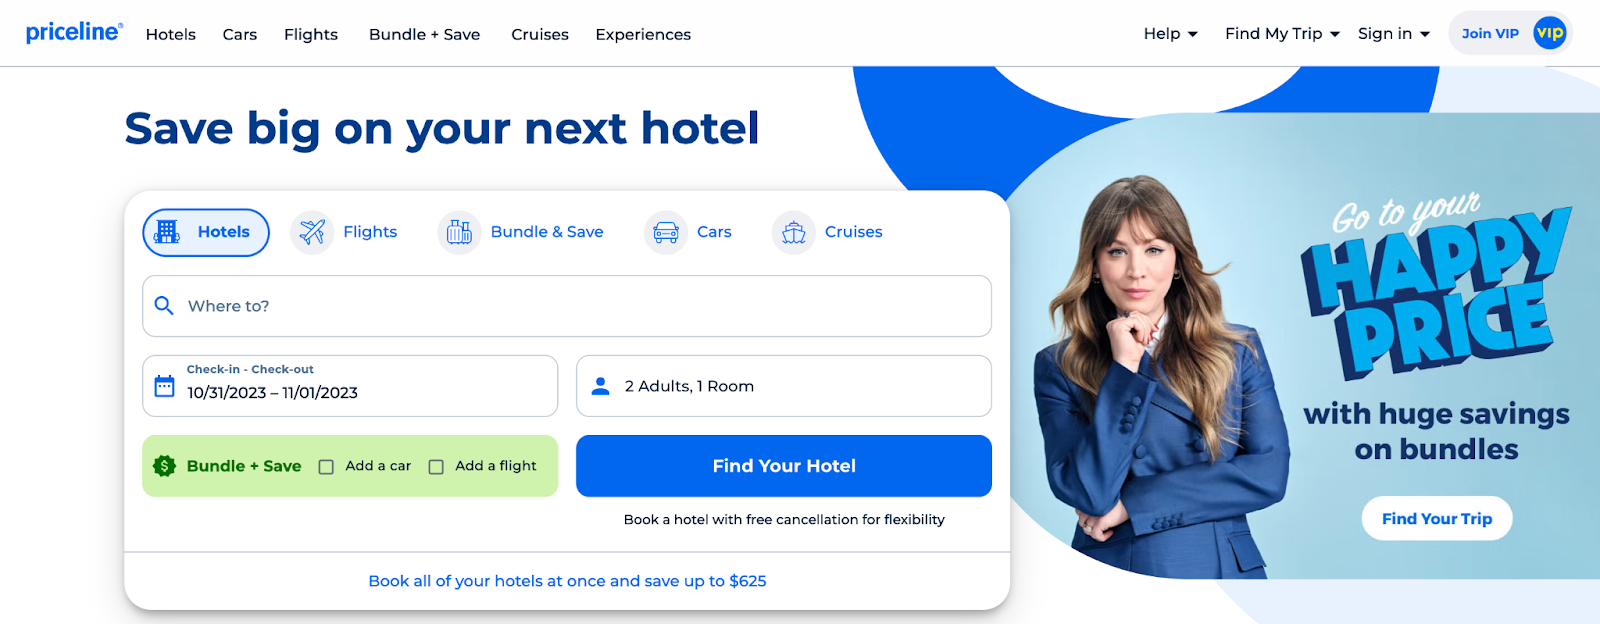 Priceline homepage for bookings